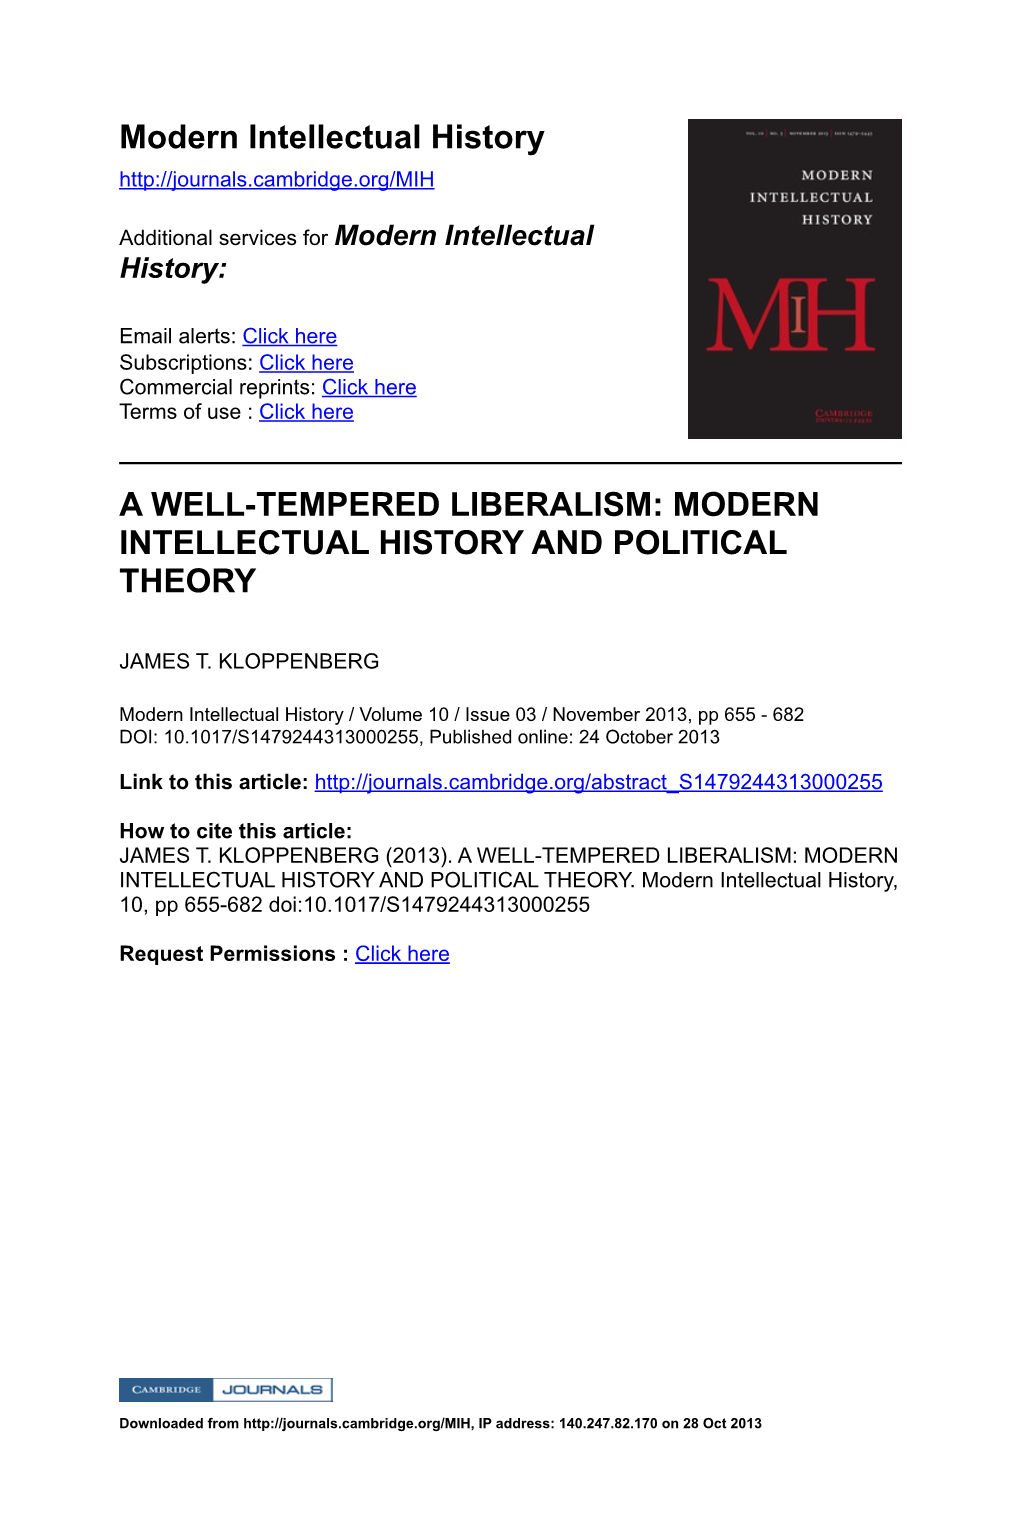 Modern Intellectual History a WELL-TEMPERED LIBERALISM